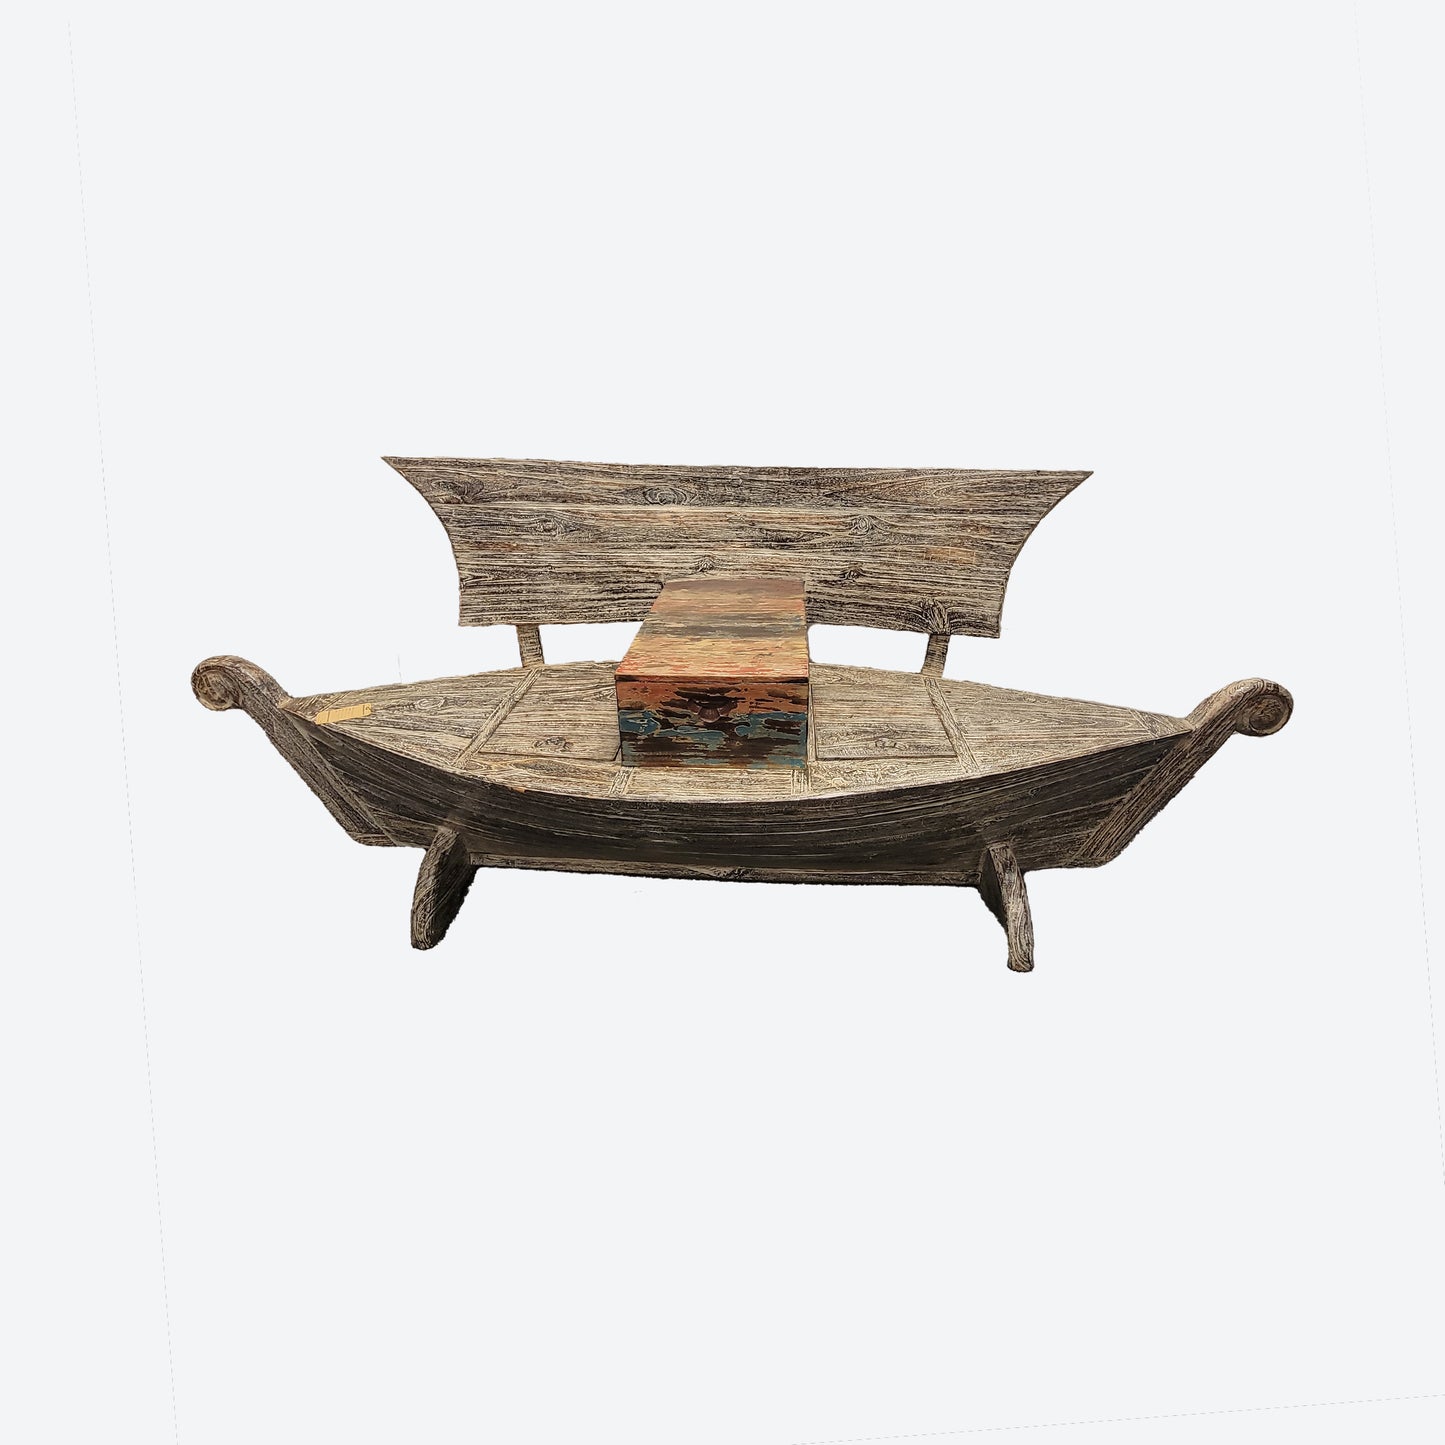 TWO SEATER OUTDOOR TEAK BOAT - SK